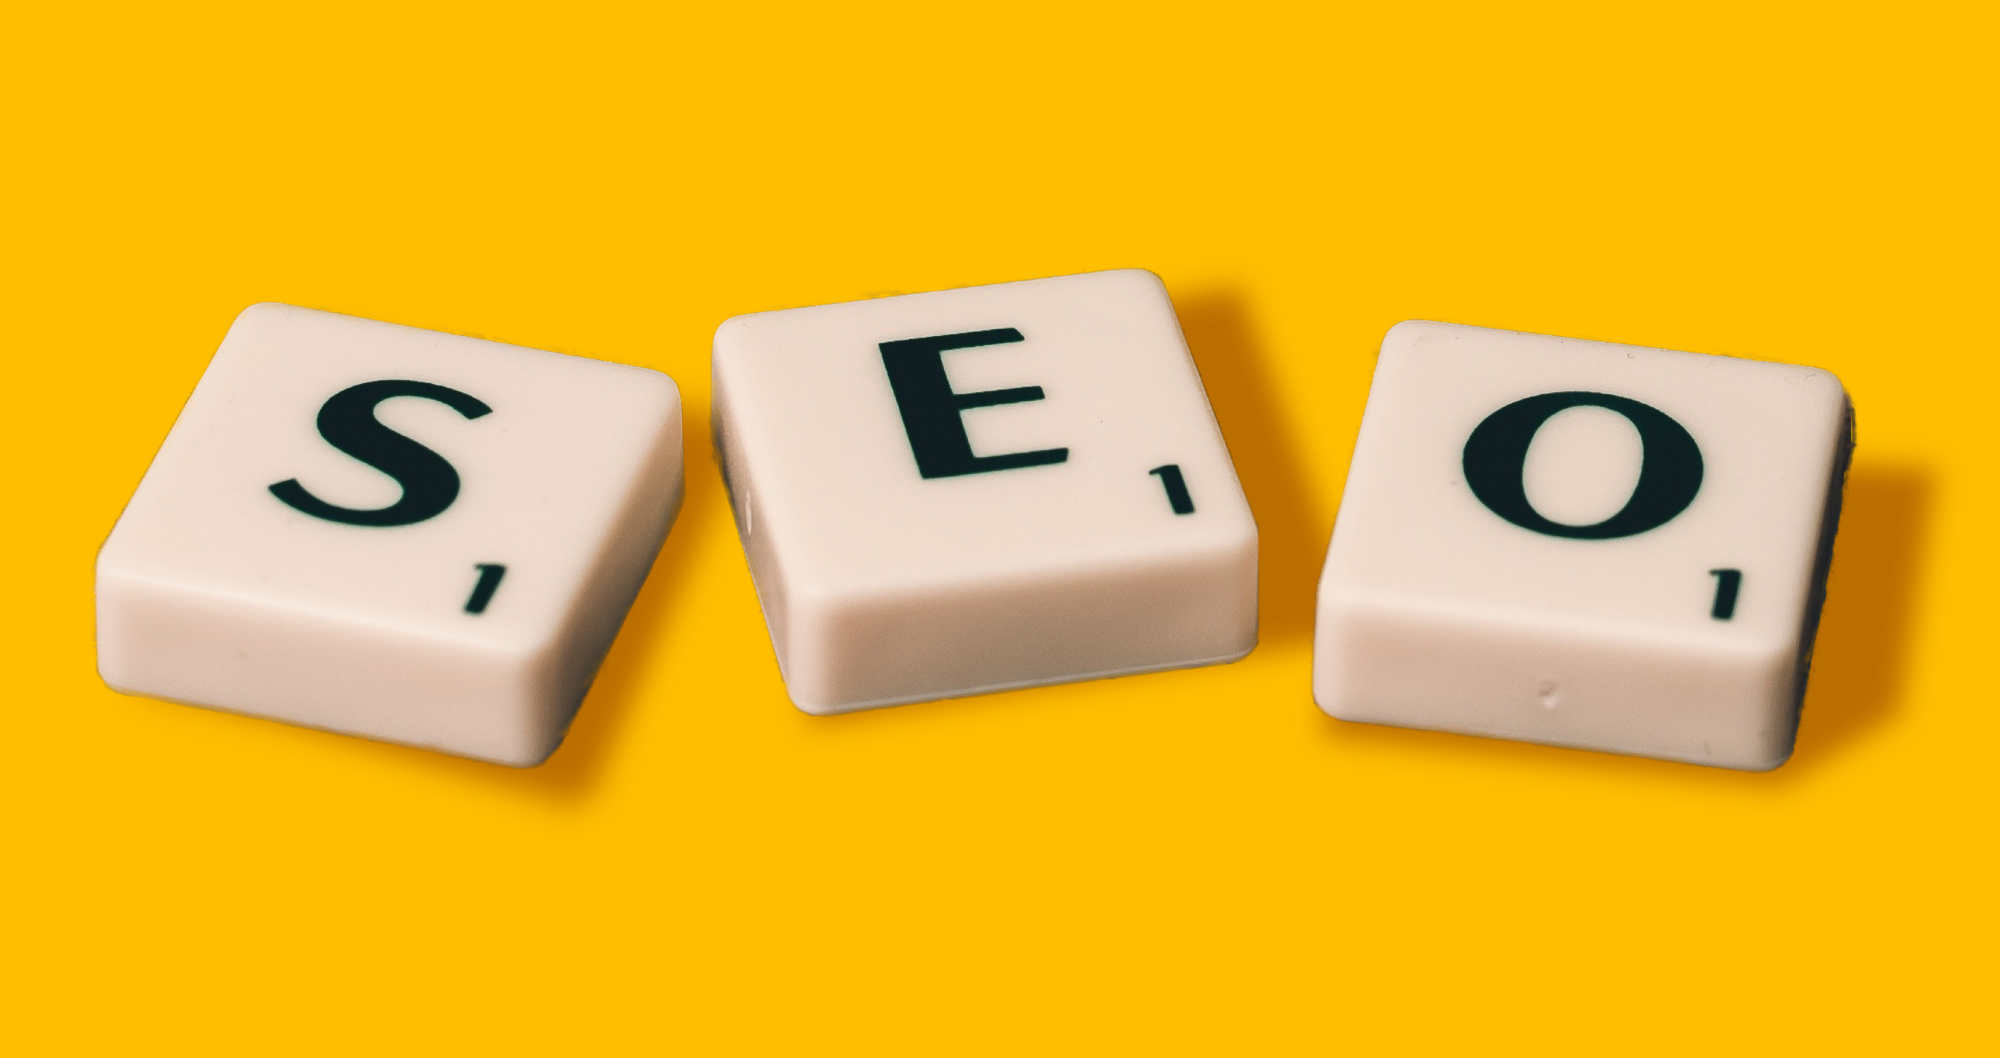 SEO - Letters in scrabble tiles on a yellow background